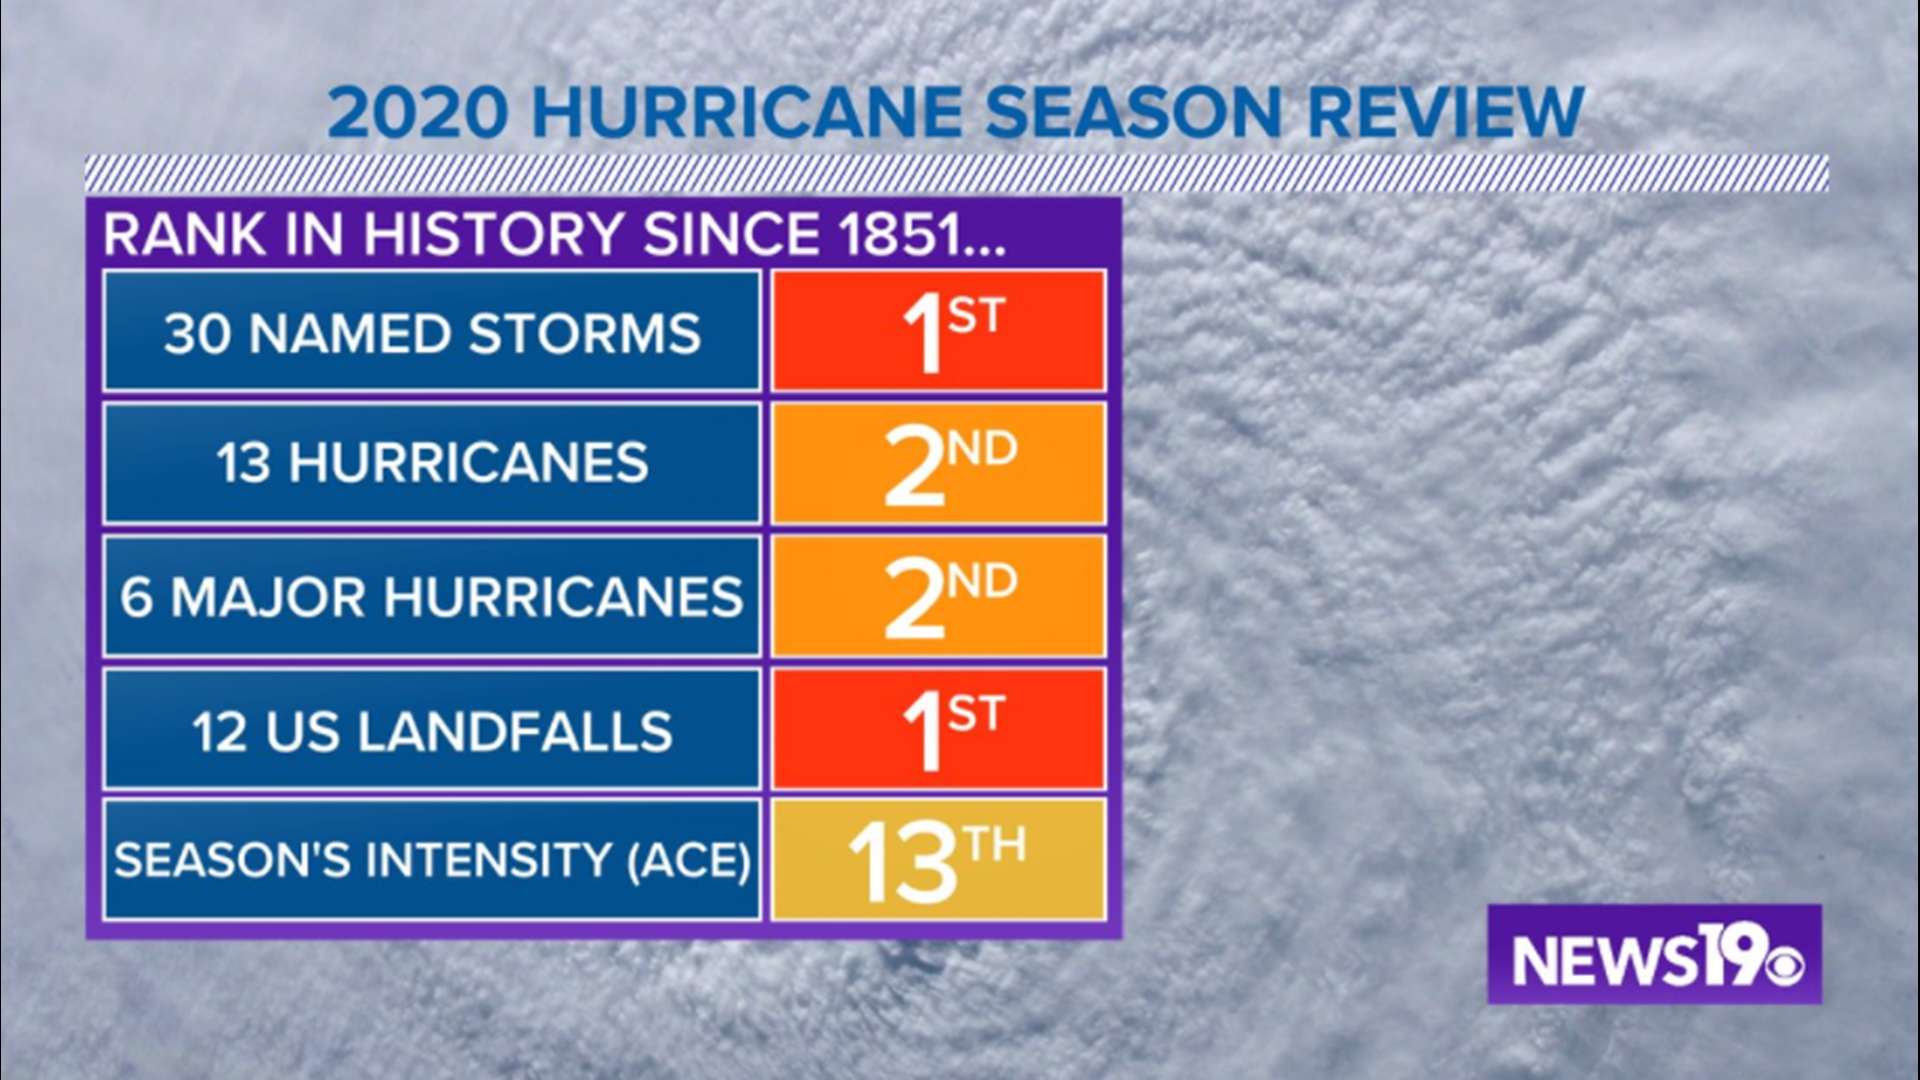 Hurricane season officially ended on November 30th, capping off a year with many broken records.